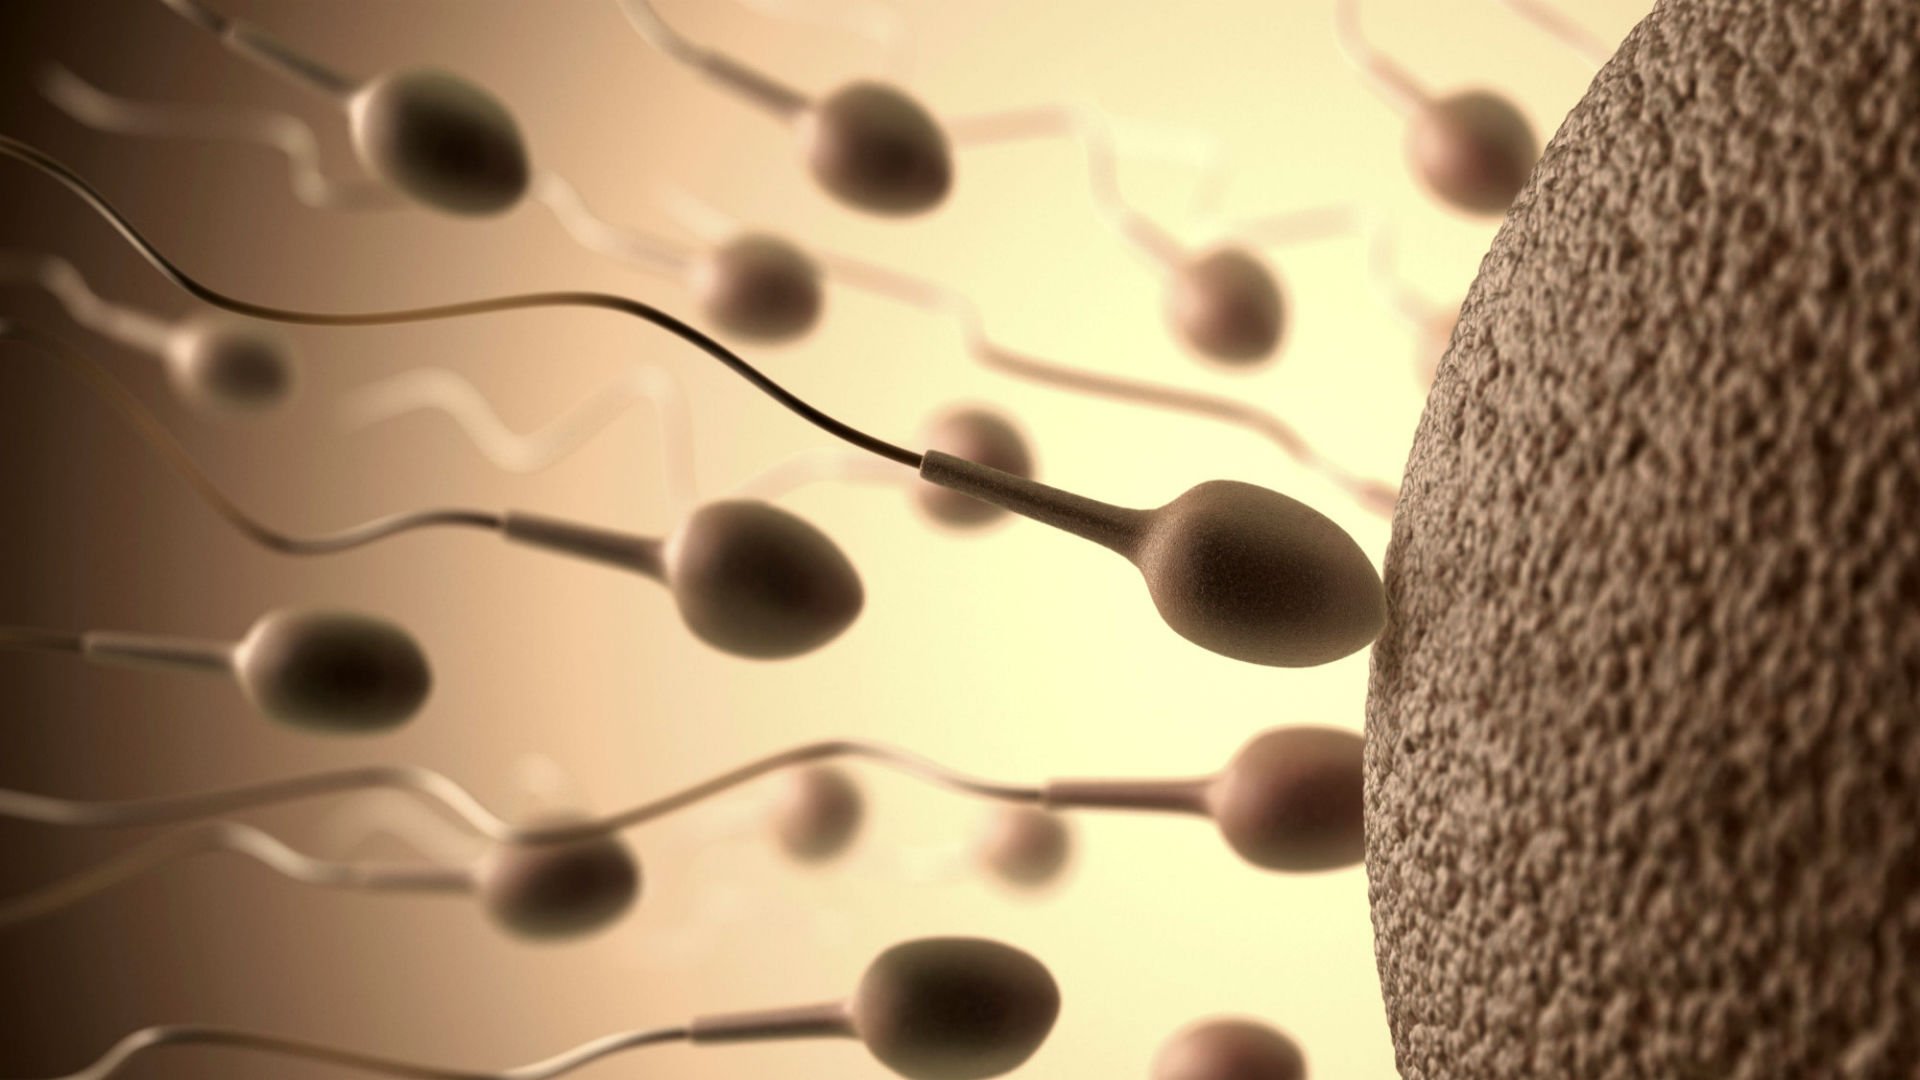 Medical Wallpaper Iphone - Sperm And Egg Background , HD Wallpaper & Backgrounds